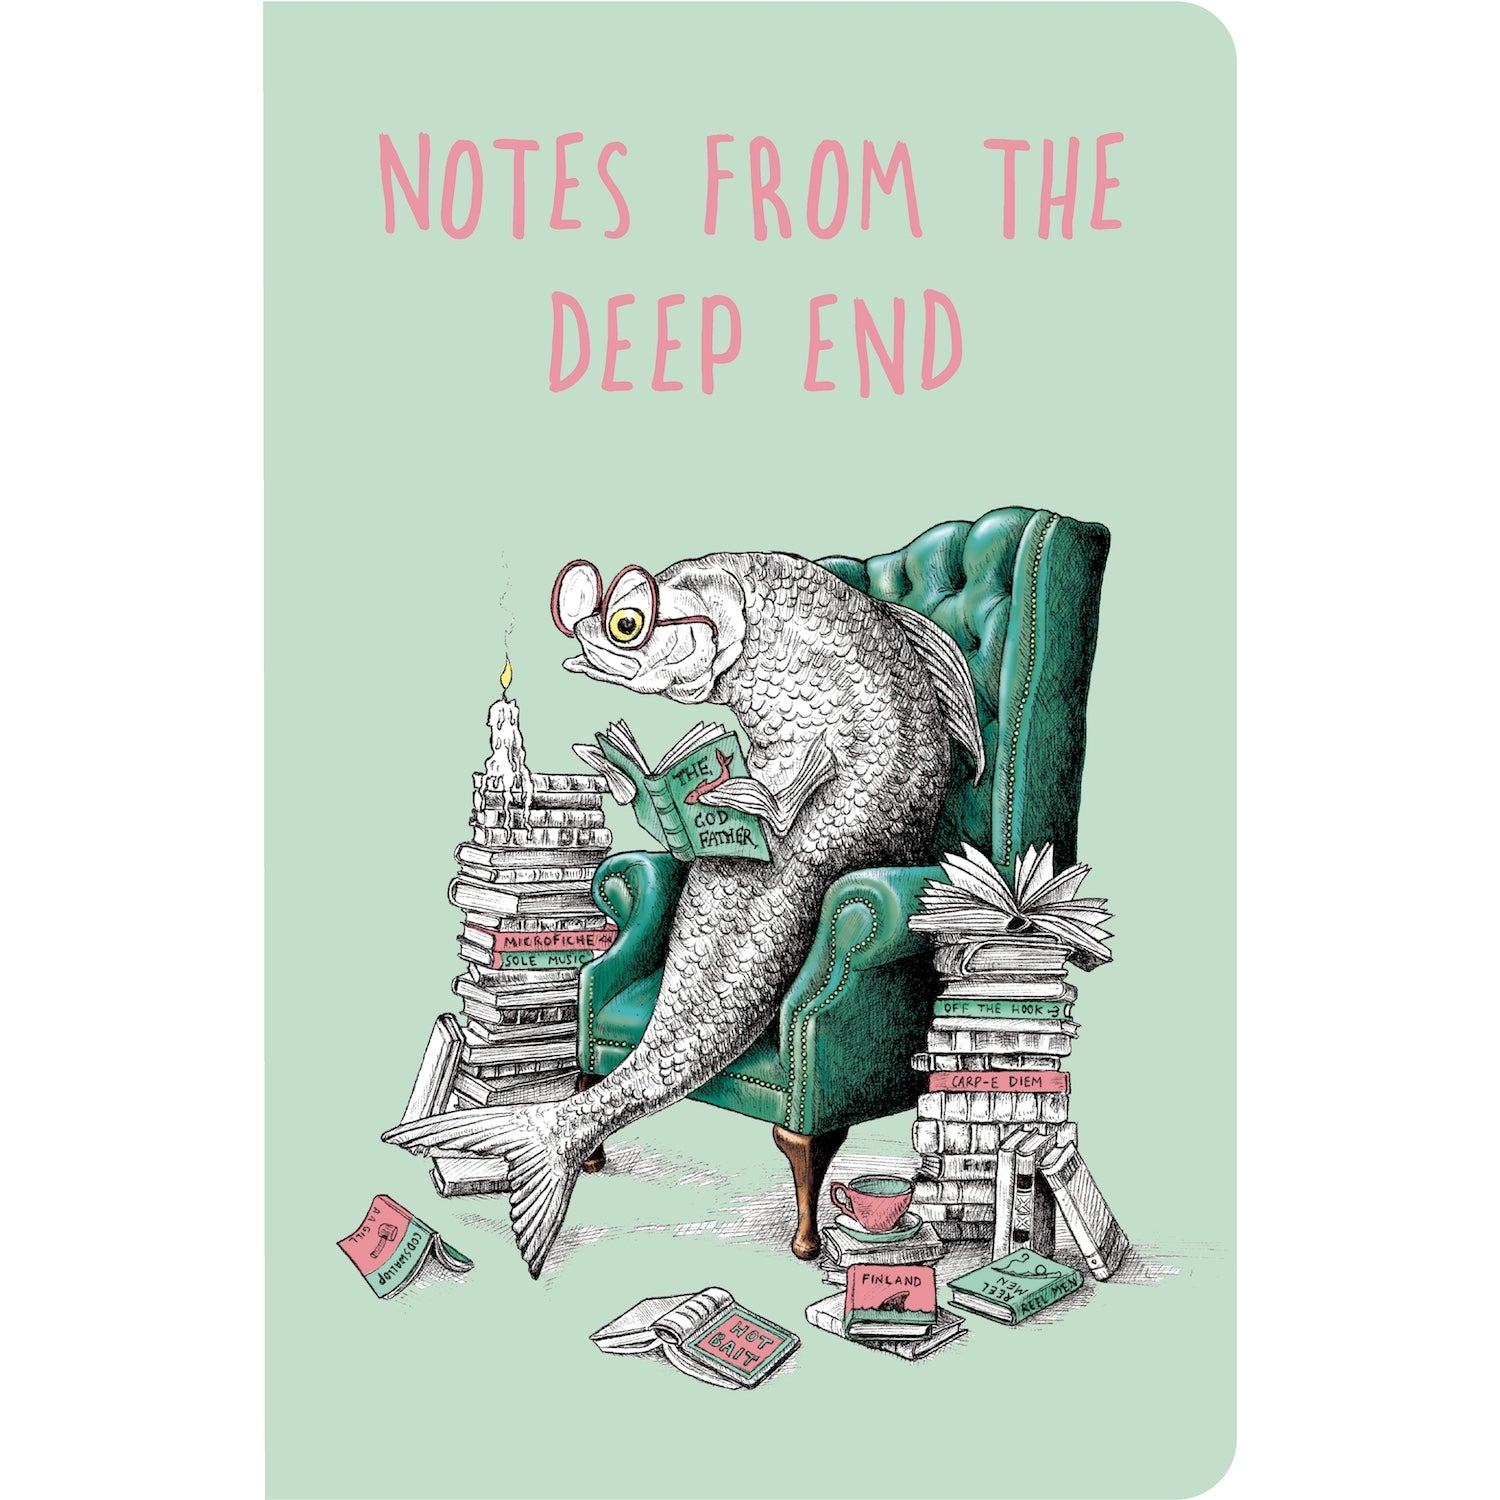 The front cover of the Deep End Notebook features a whimsical illustration of a bespectacled fish resting in an upholstered green chair reading a book, surrounded by stacks of more books. The image is captioned &quot;NOTES FROM THE DEEP END&quot; in pink over the mint green background. 